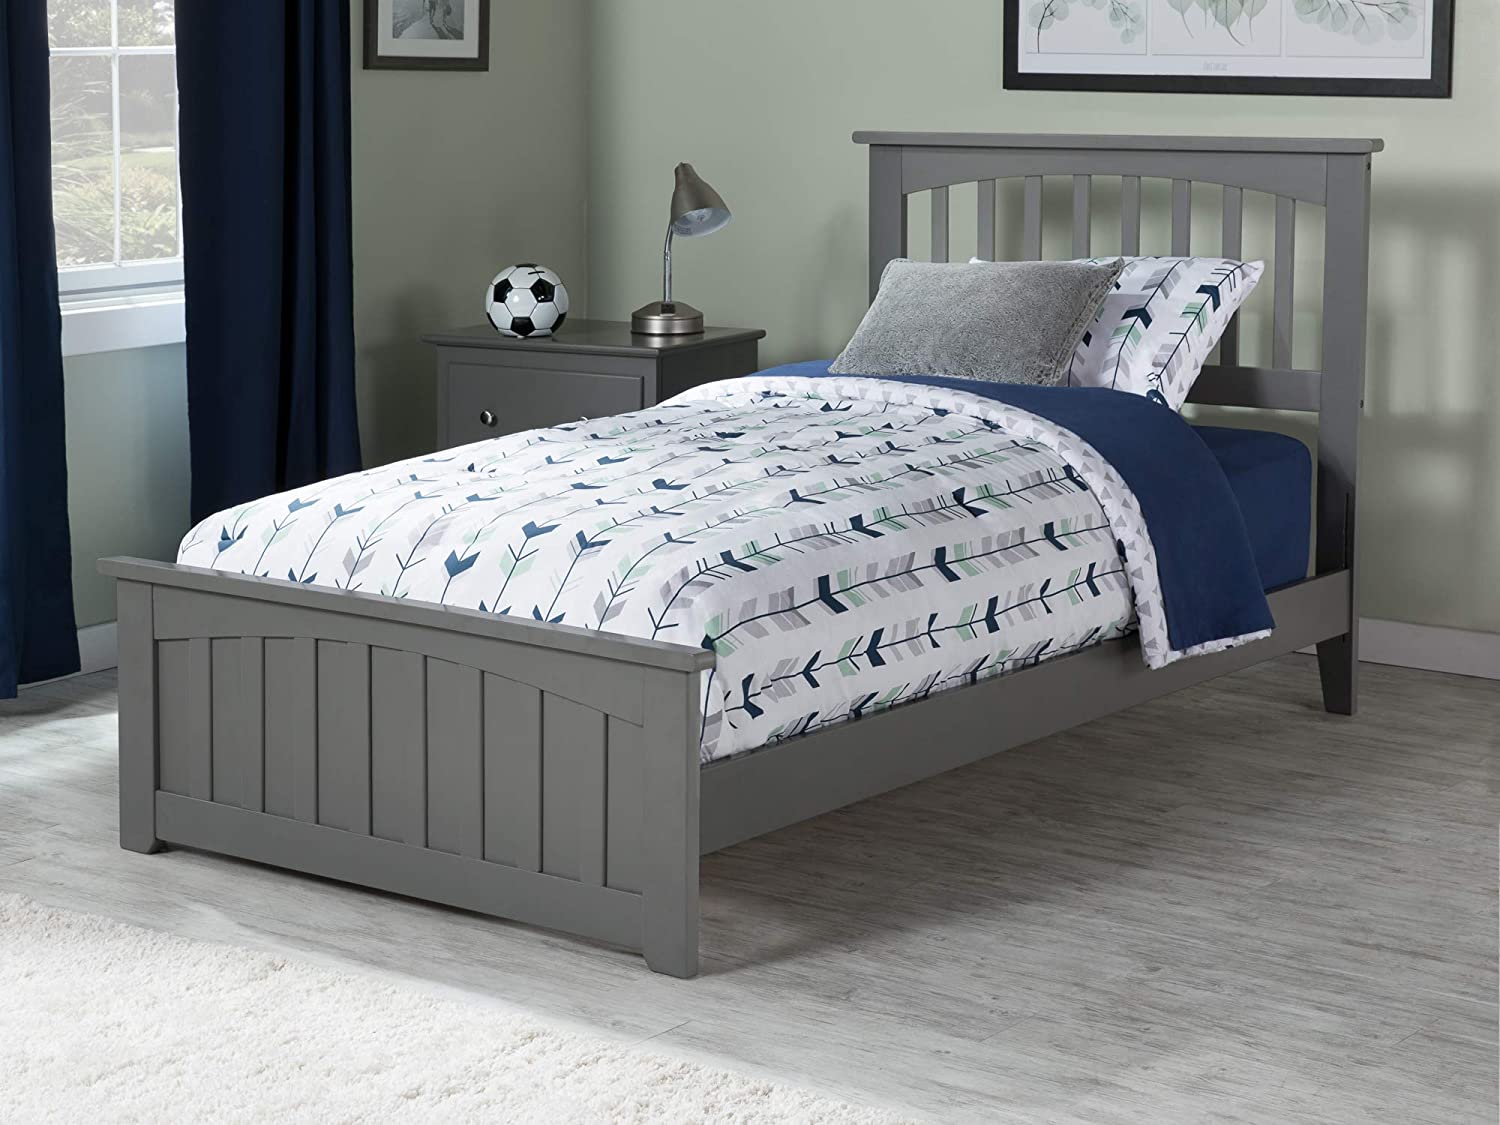 AFI AR8726039 Mission Traditional Bed Wood, Twin, Grey